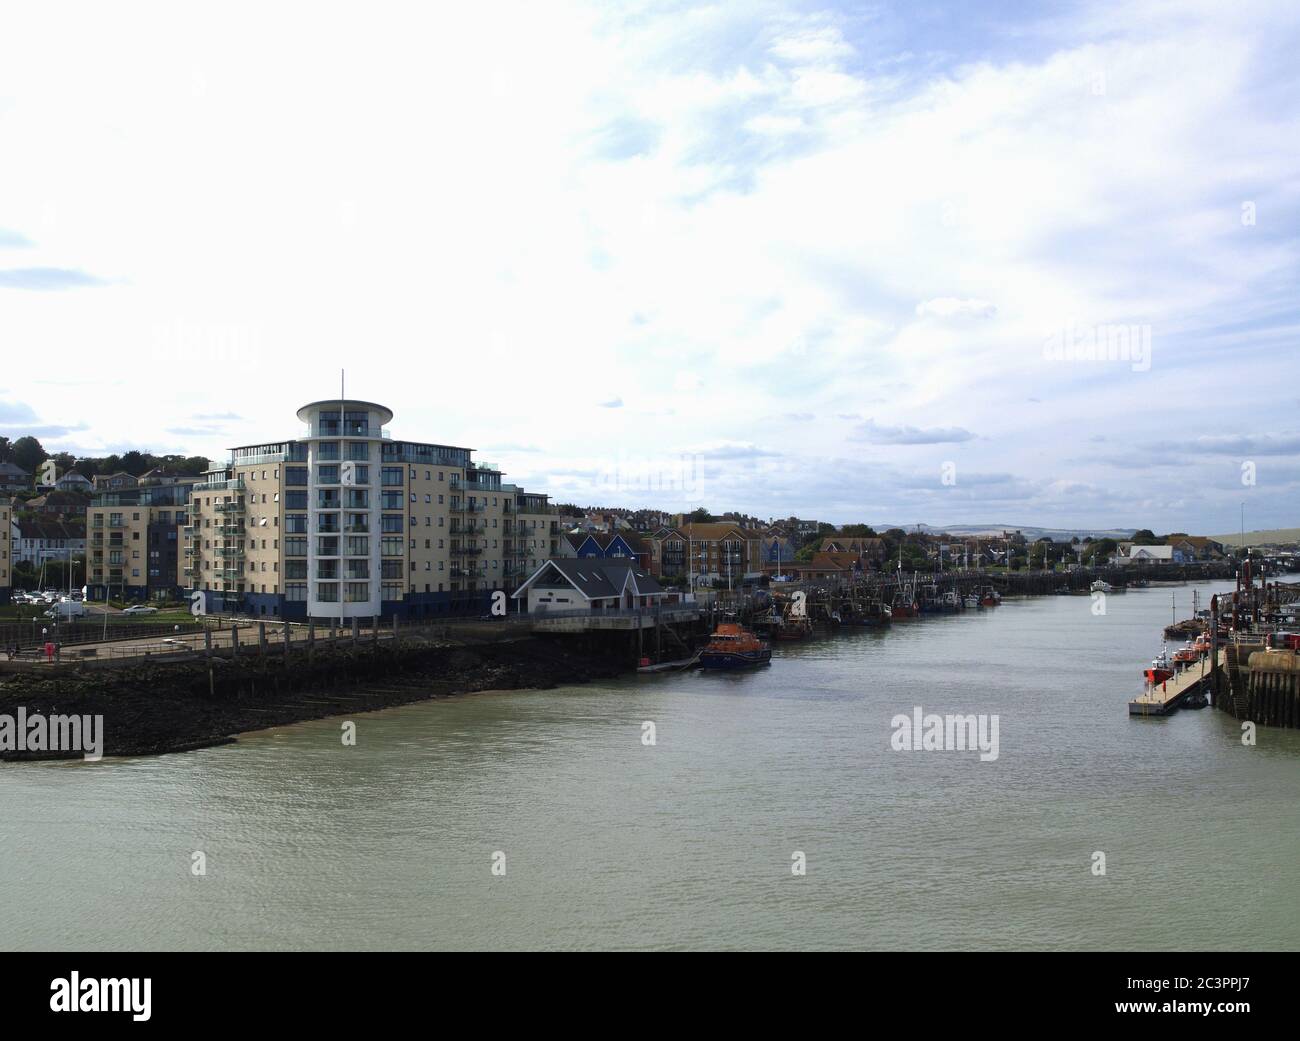 View of marina housing at Newhaven, East Sussex taken from  the Seven Sisters cross channel ferry Stock Photo